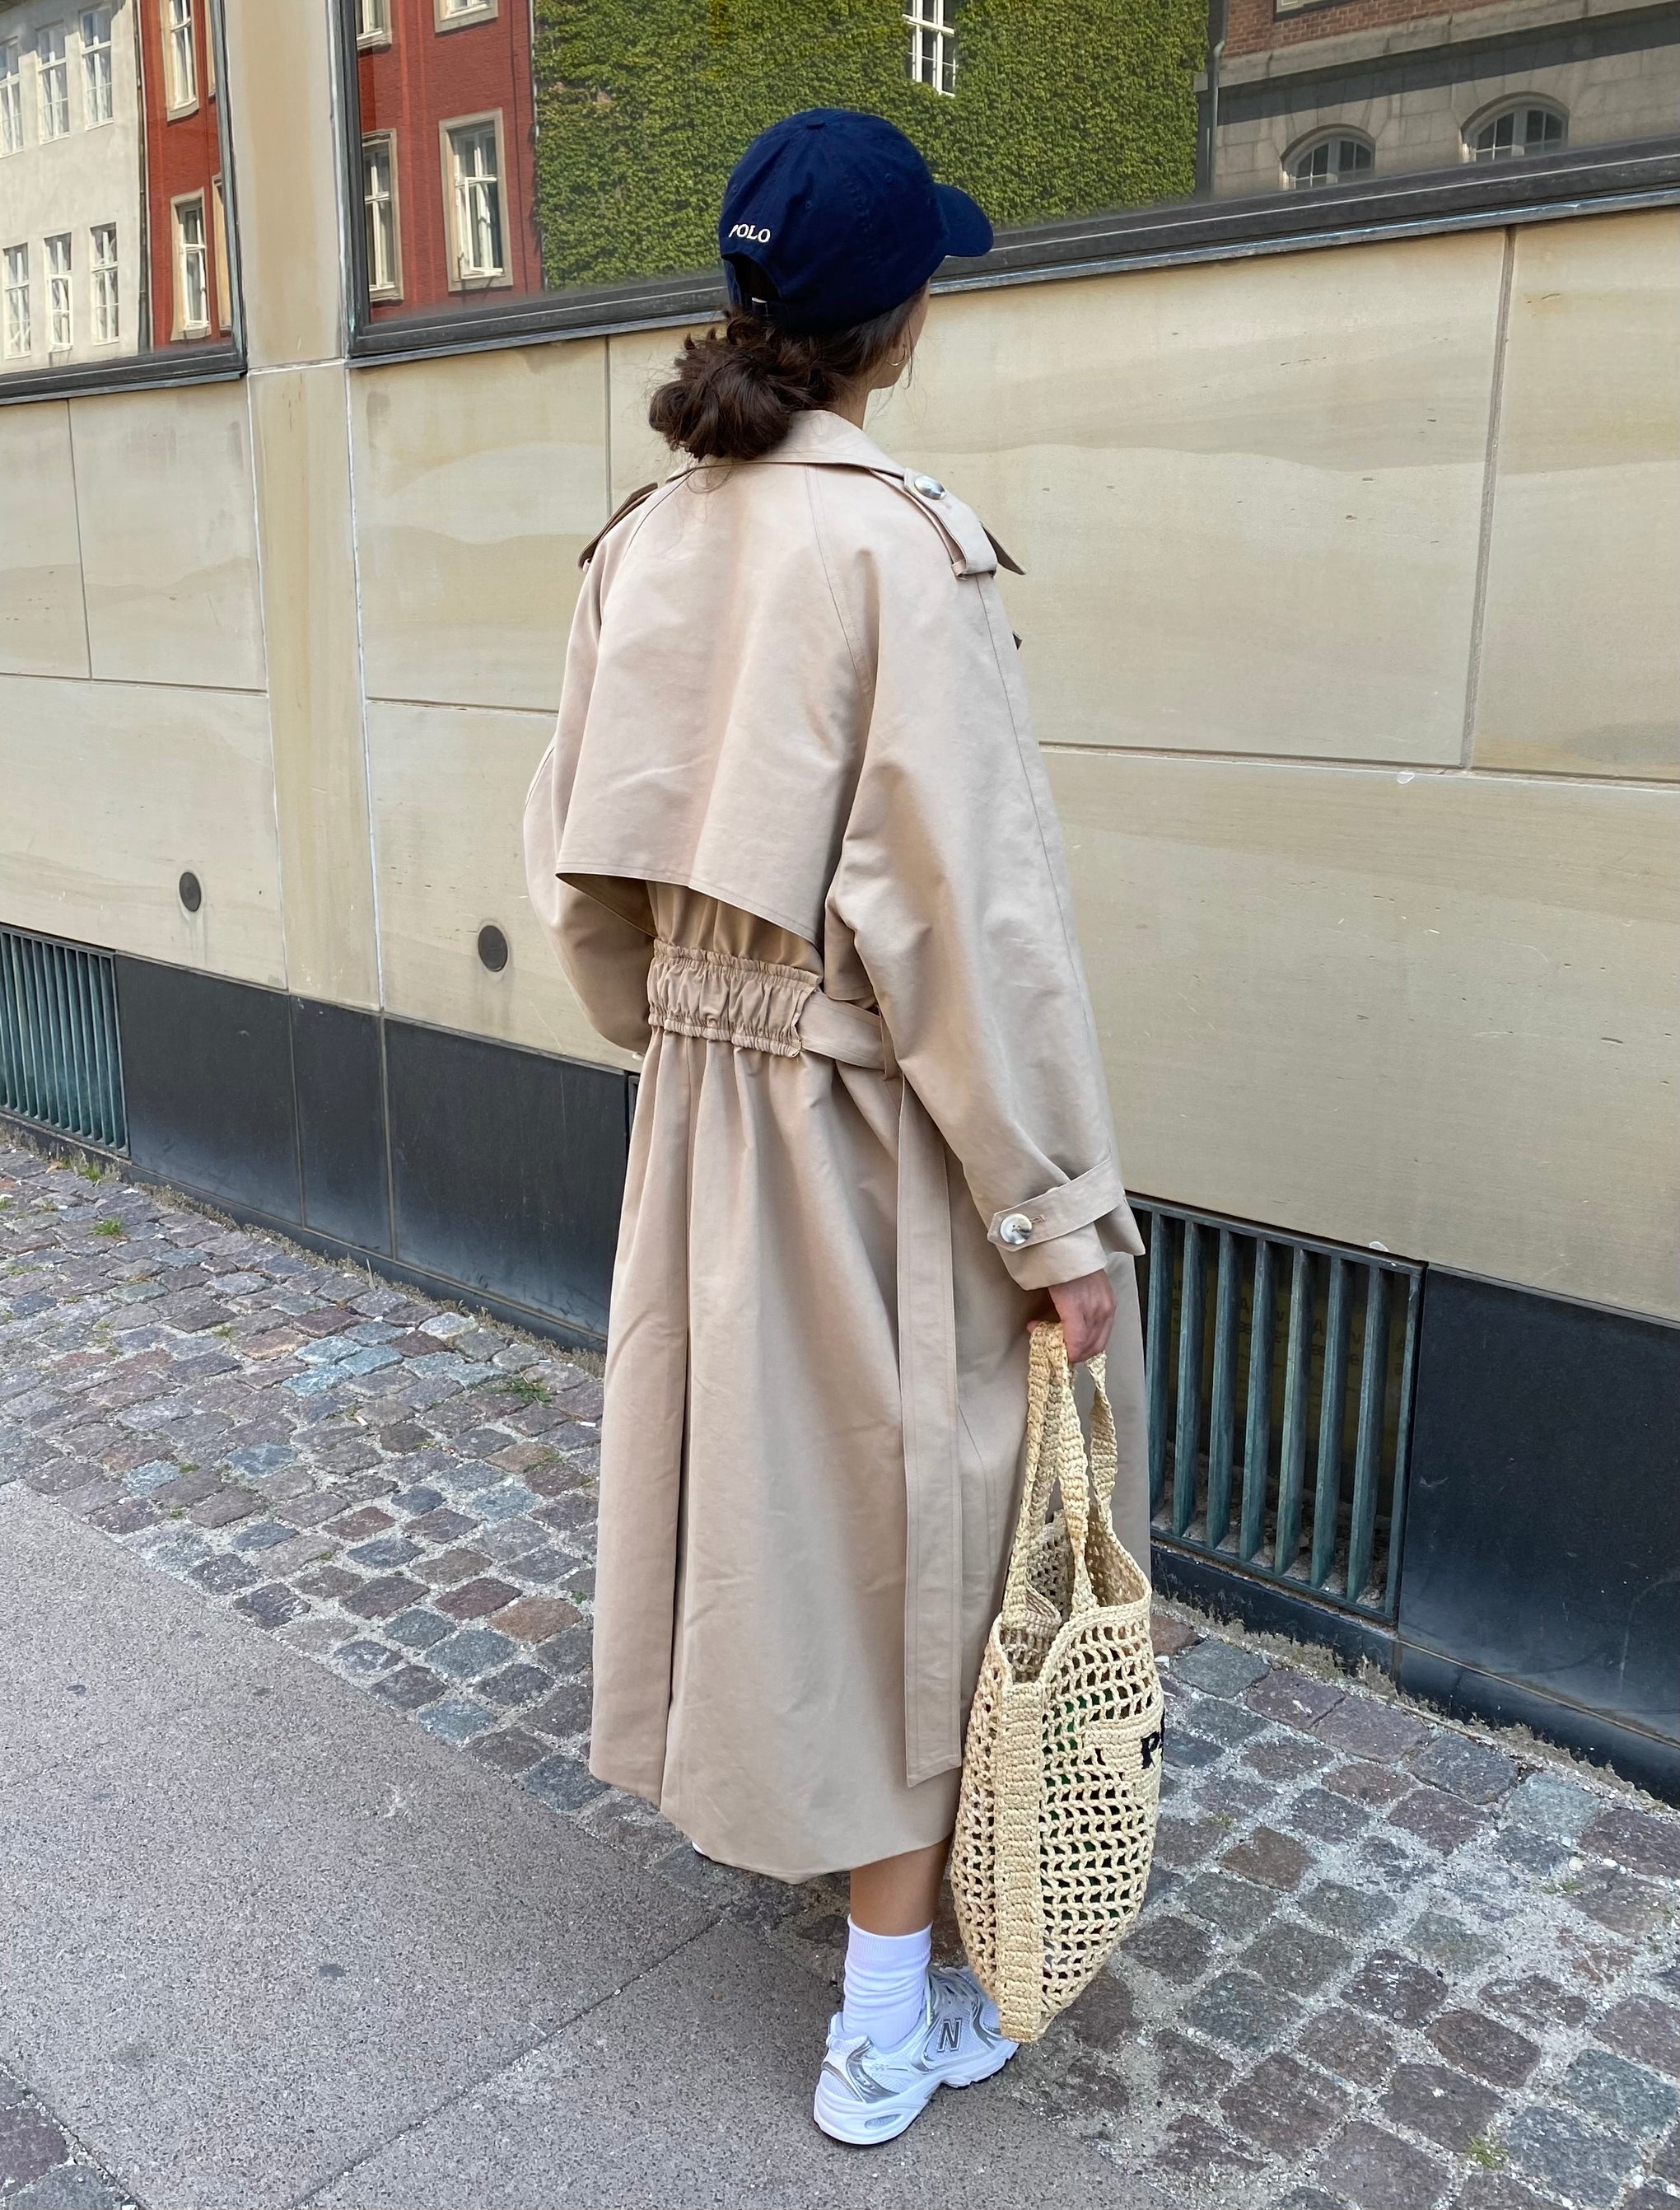 Meotine Cassandra Trench Coat in Beige from The New Trend